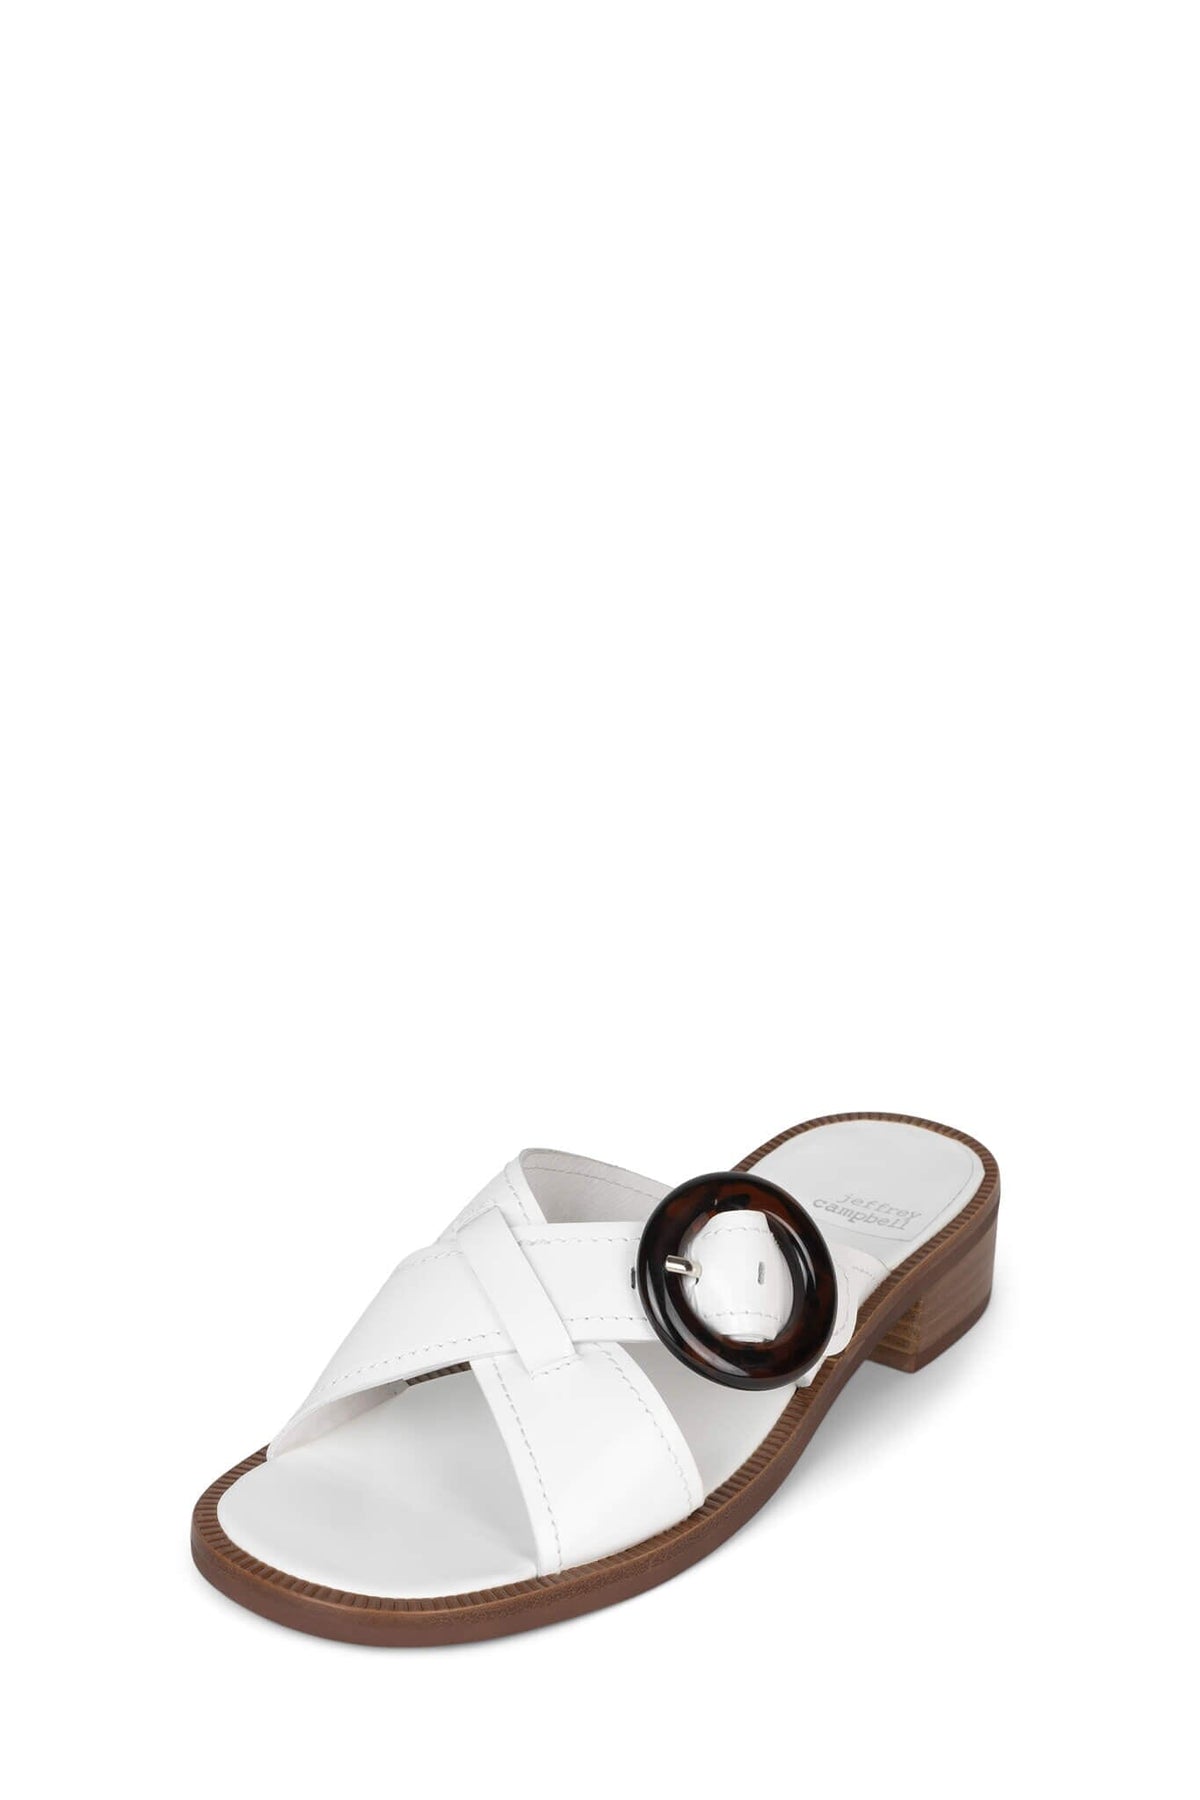 GLIMPSE Jeffrey Campbell Heeled Sandals White Box Natural Stack